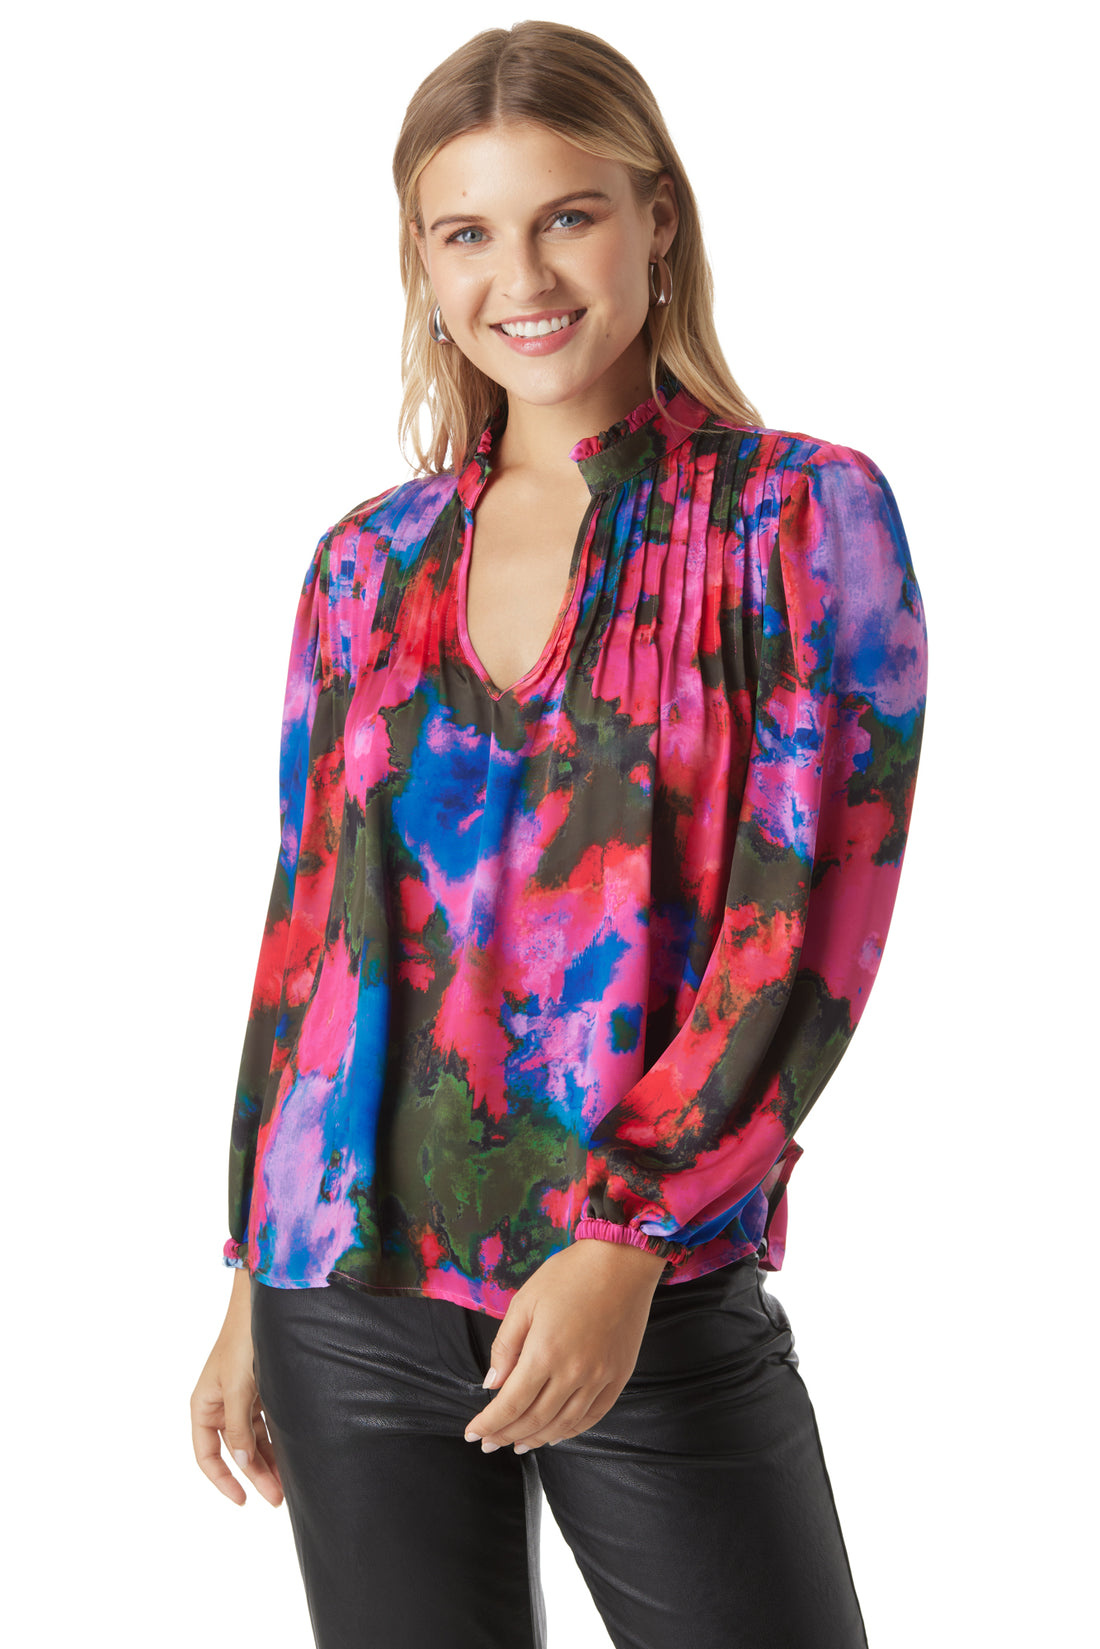 Crosby By Mollie Burch Gabby Blouse Blurred Floral